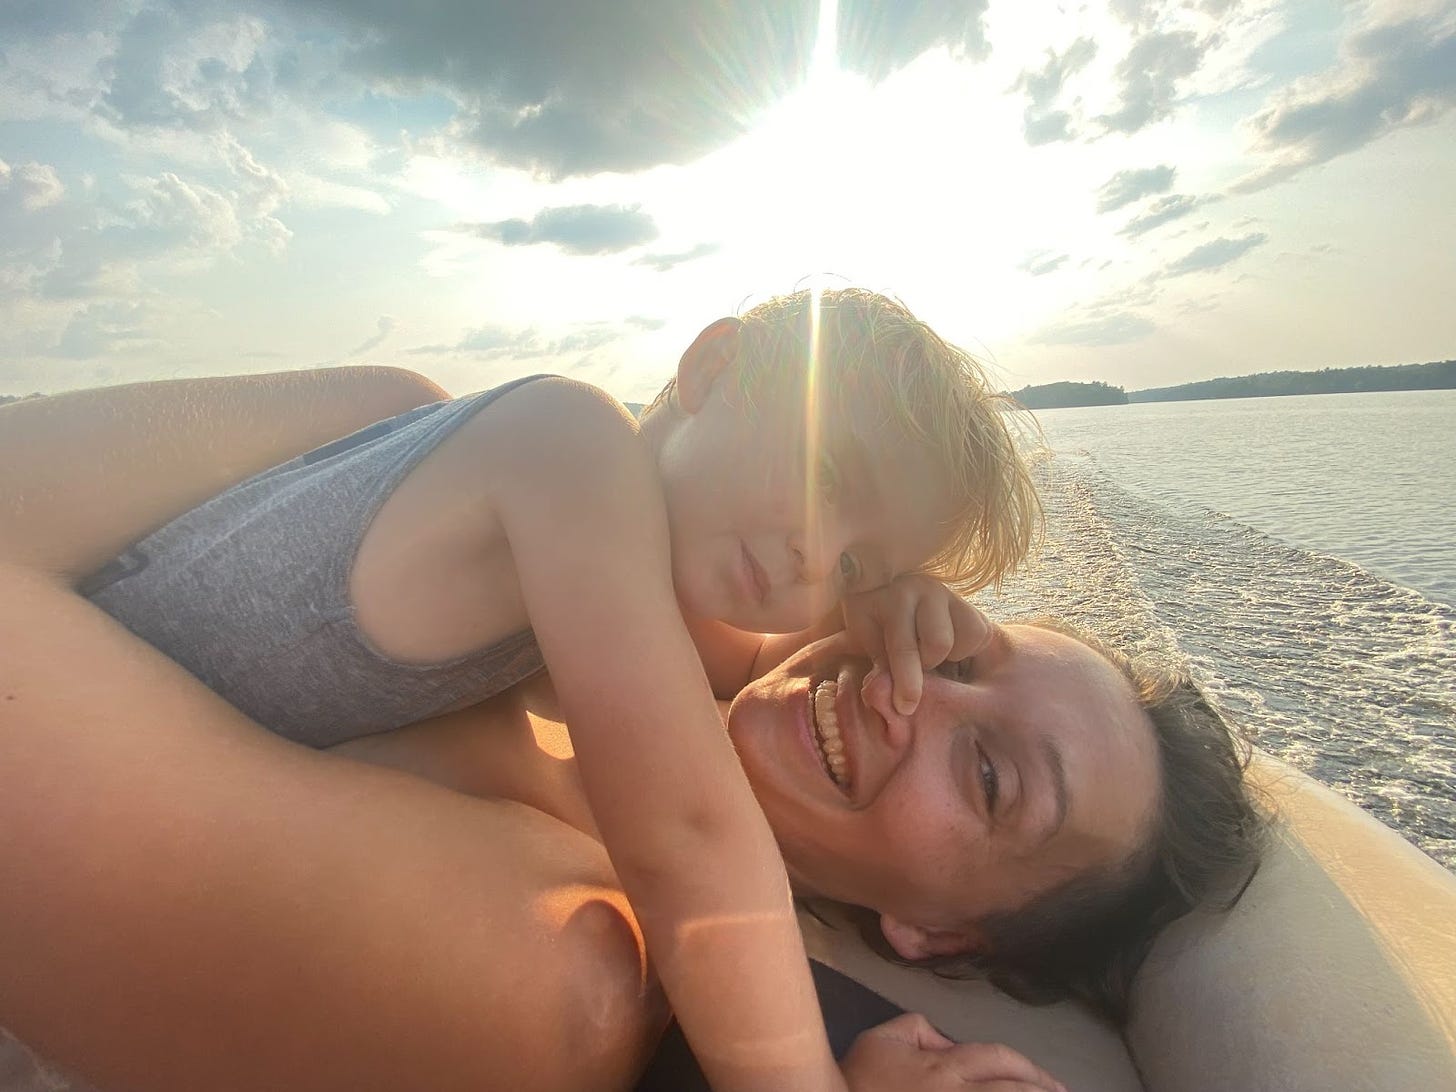 Tarzan laying in the back of a boat with her blond, 3 year old son laying on top of her. The sun sets in the background and you can see it reflecting on the water. 